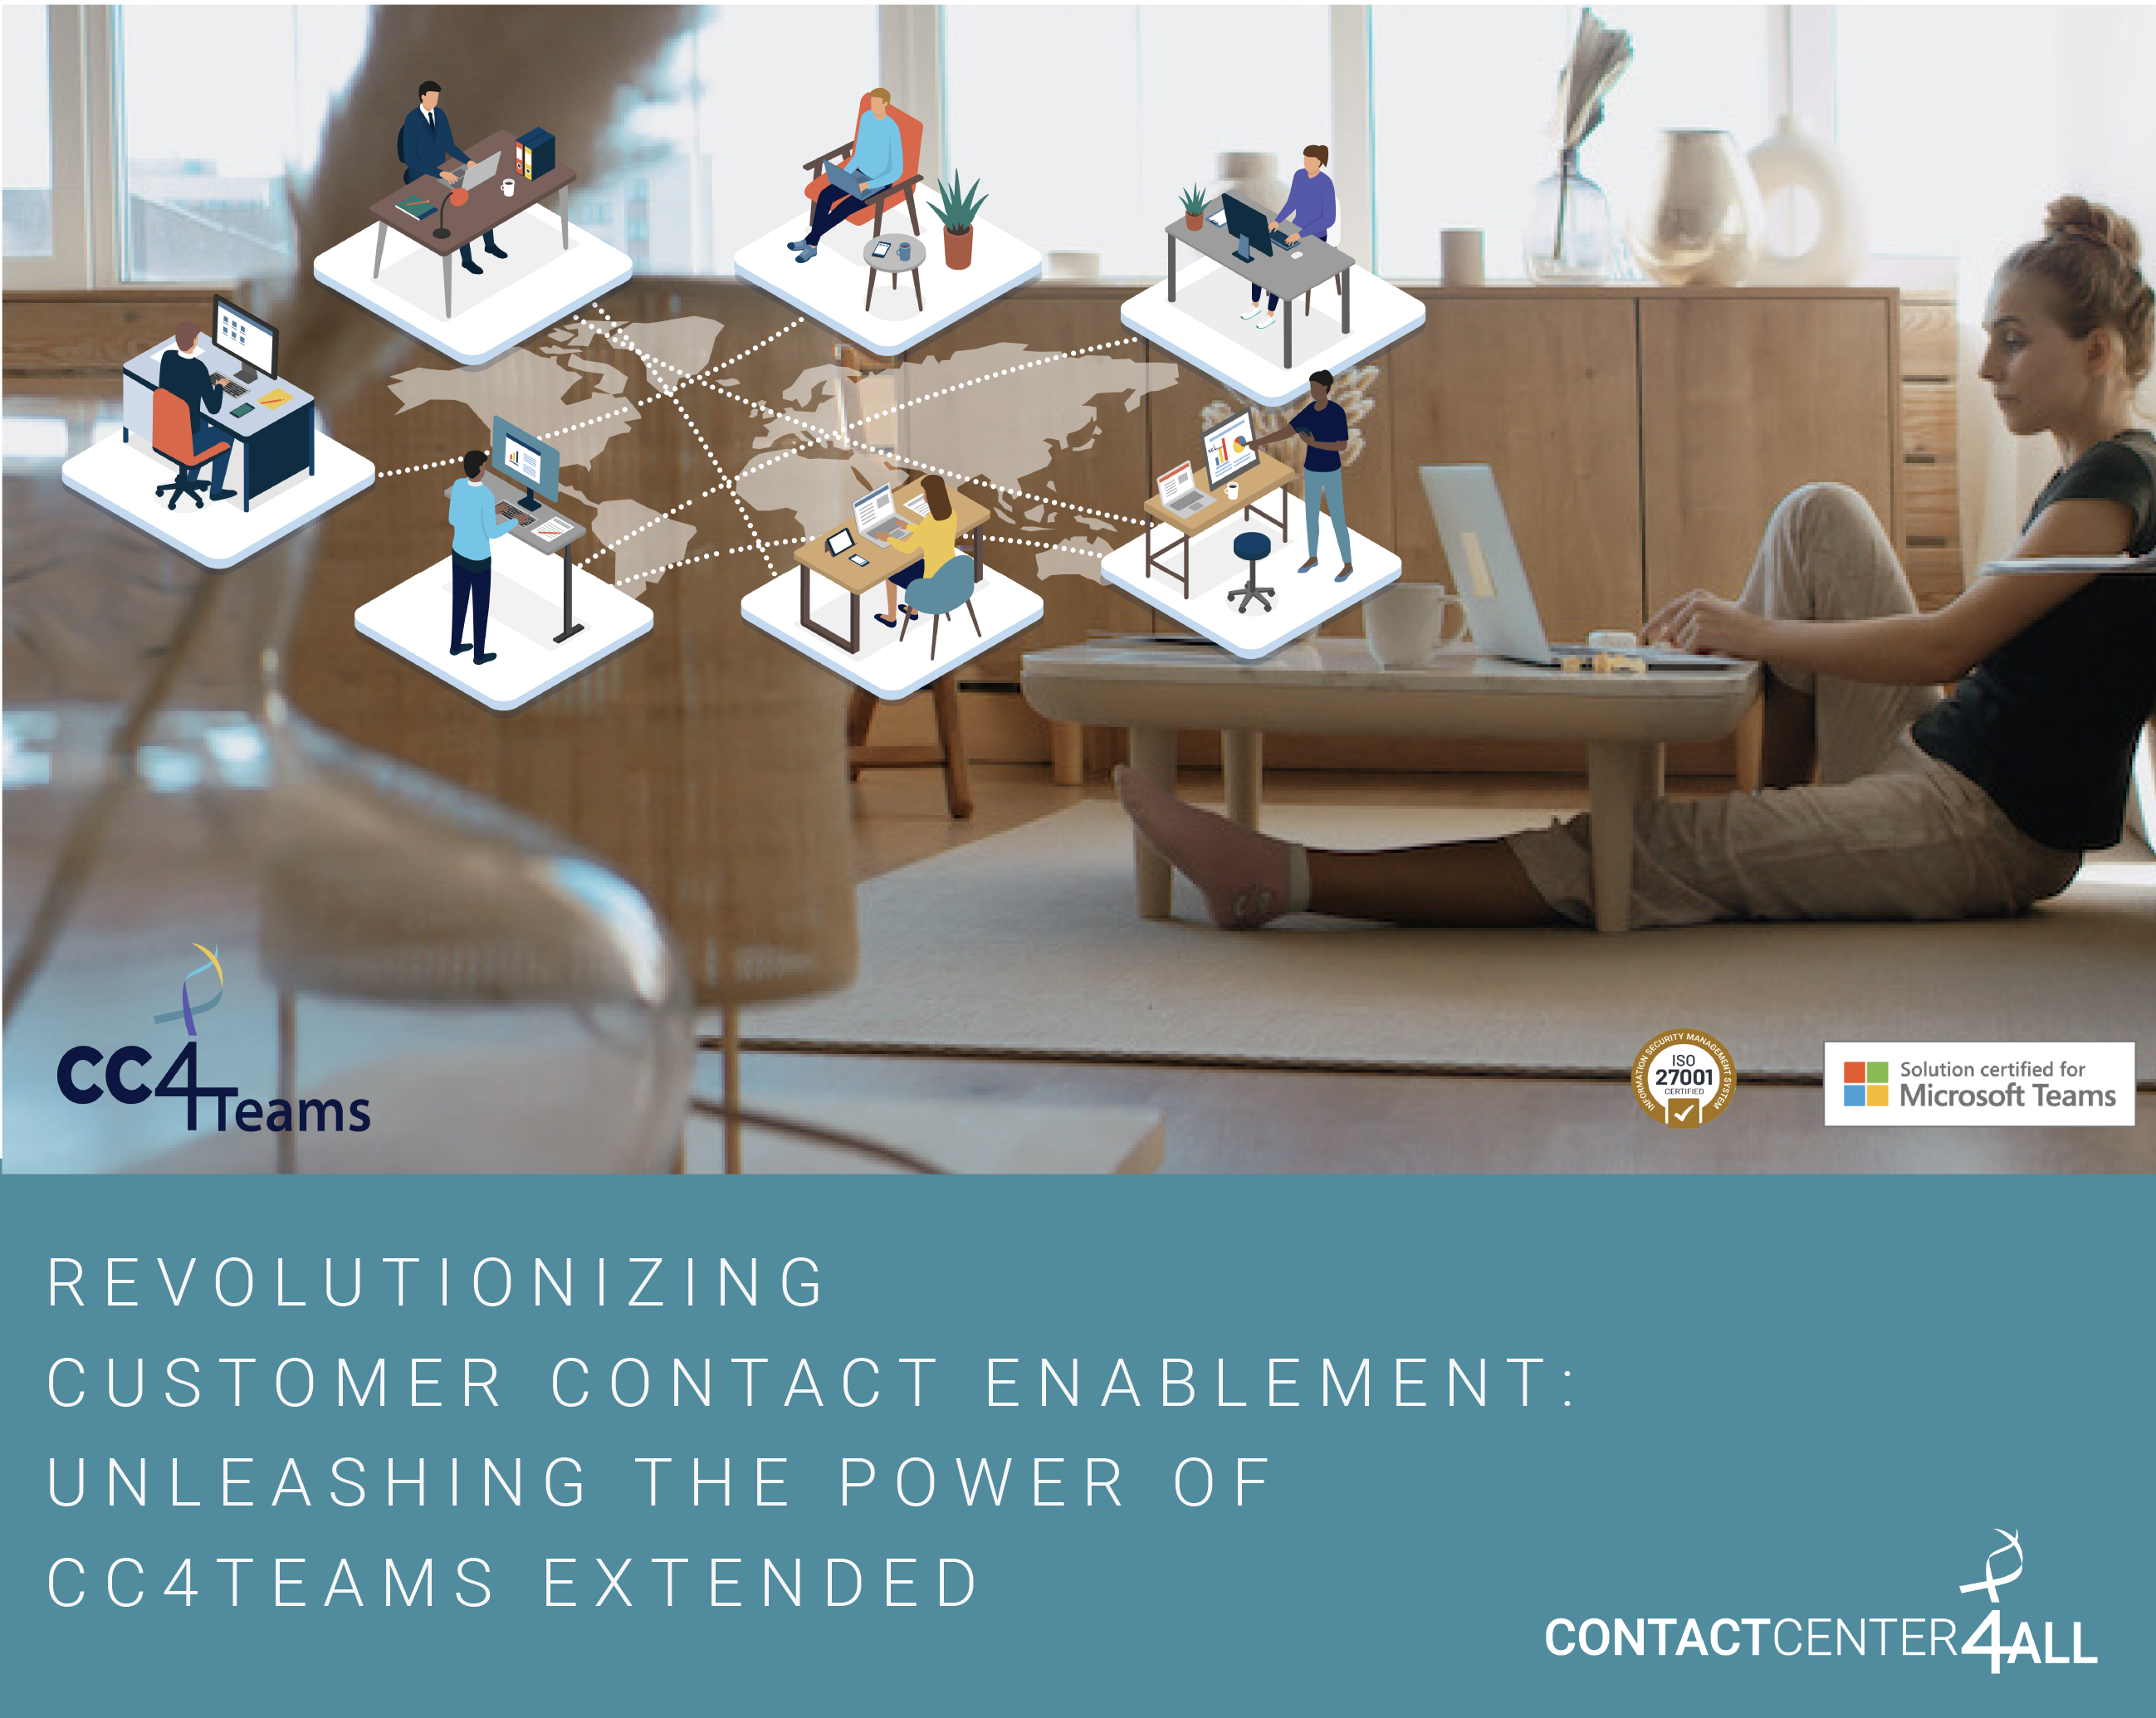 Revolutionizing Customer Contact Enablement: Unleashing the Power of CC4Teams Extended